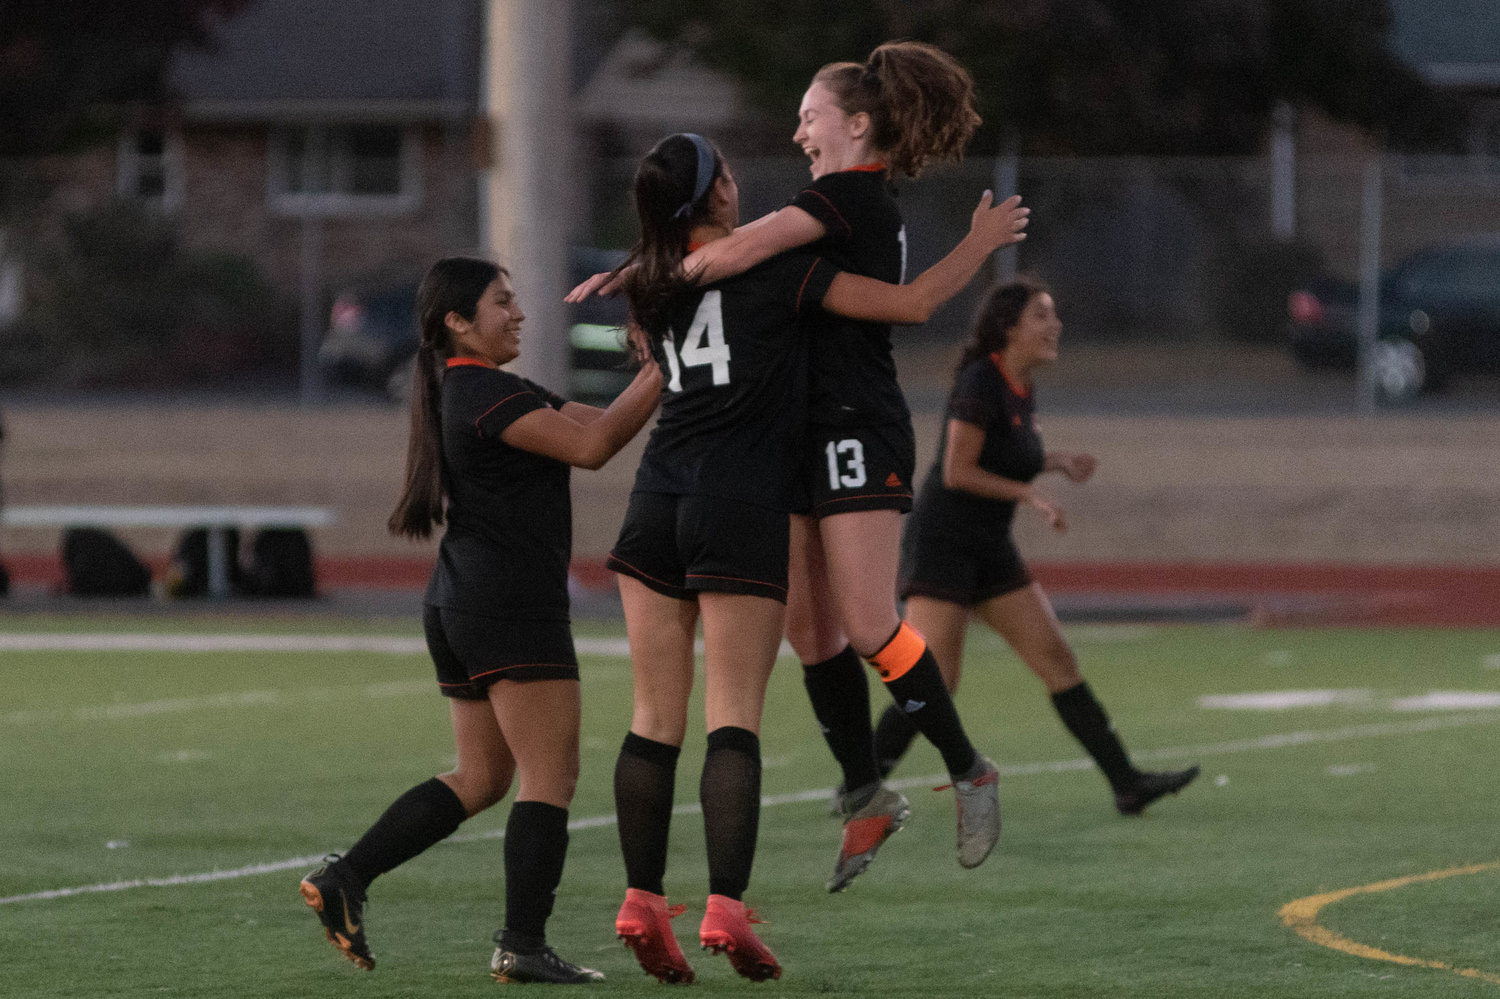 Riley Babka (14) celebrates with her team after scoring a goal in the 11th minute in the Tigers loss to Shelton Thursday night.